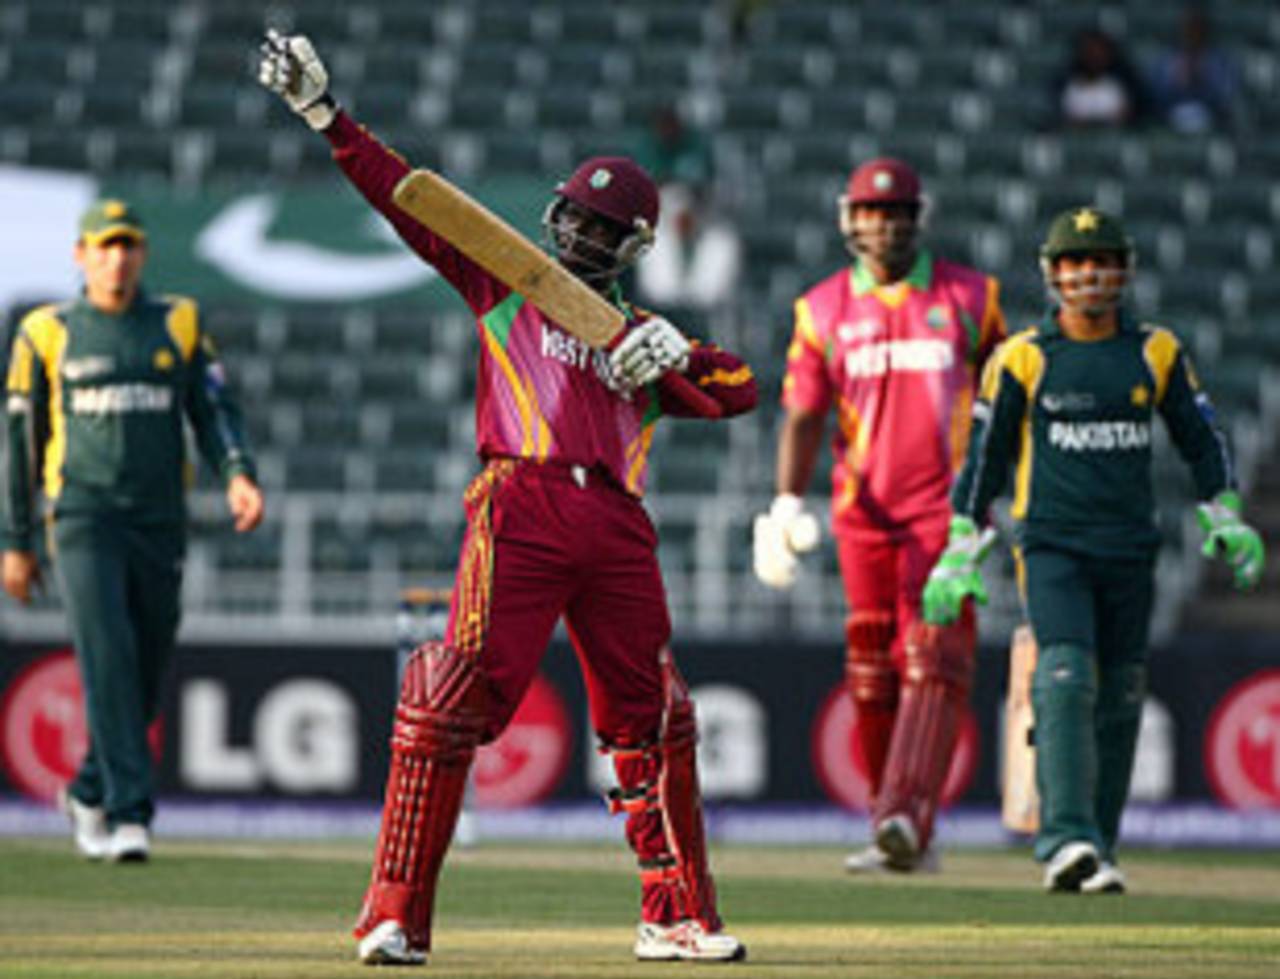 Nikita Miller gestures to his team-mates after reaching his fifty, Pakistan v West Indies, Champions Trophy, Group A, Johannesburg, September 23, 2009